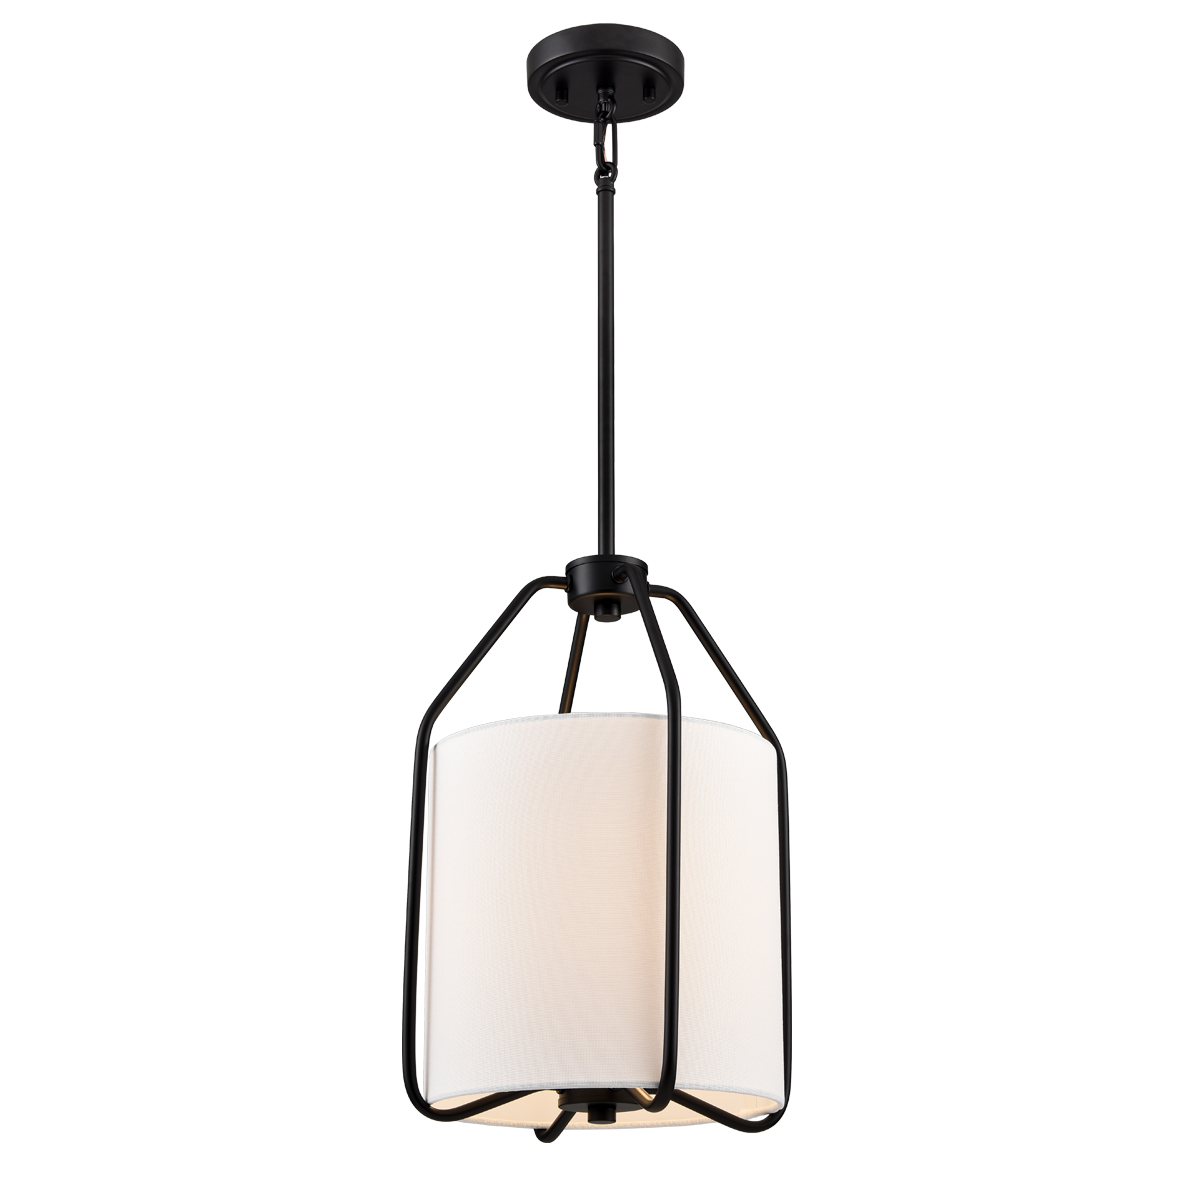 Cone Pendant Light Fixture with Metal Lantern Fabric Drum Shade 16" Black Chandeliers